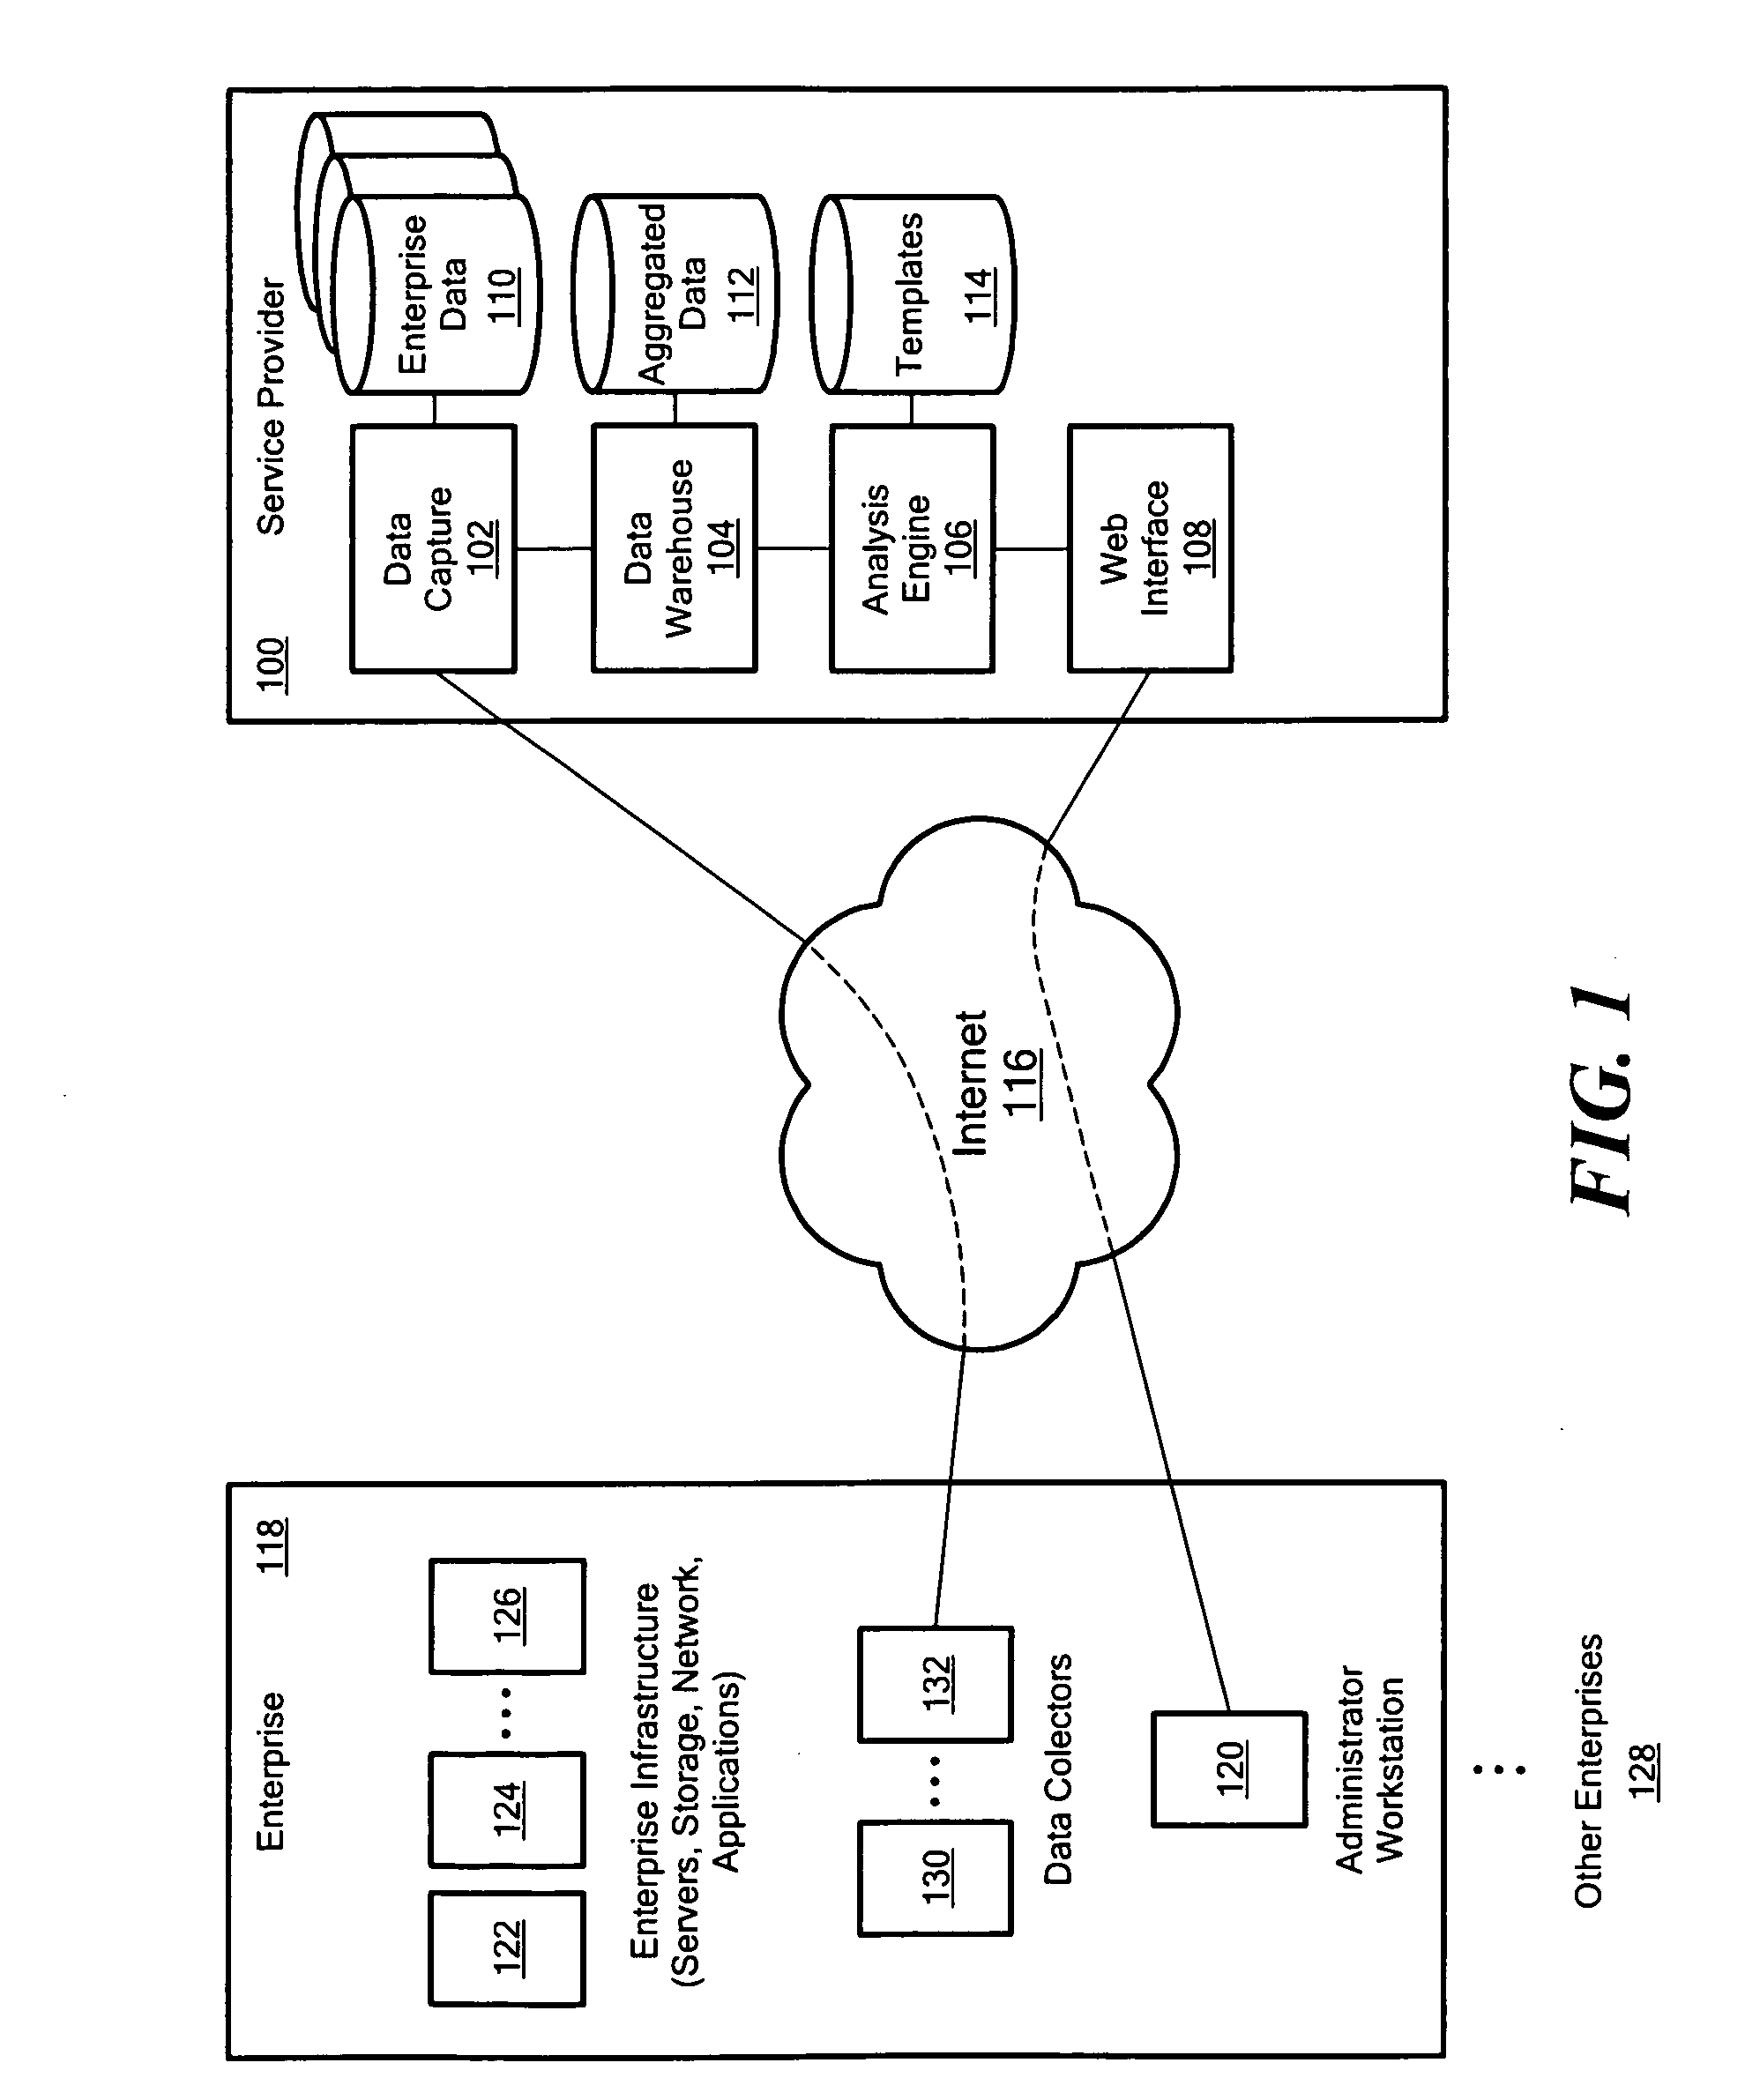 Systems and Methods for Analyzing Information Technology Systems Using Collaborative Intelligence